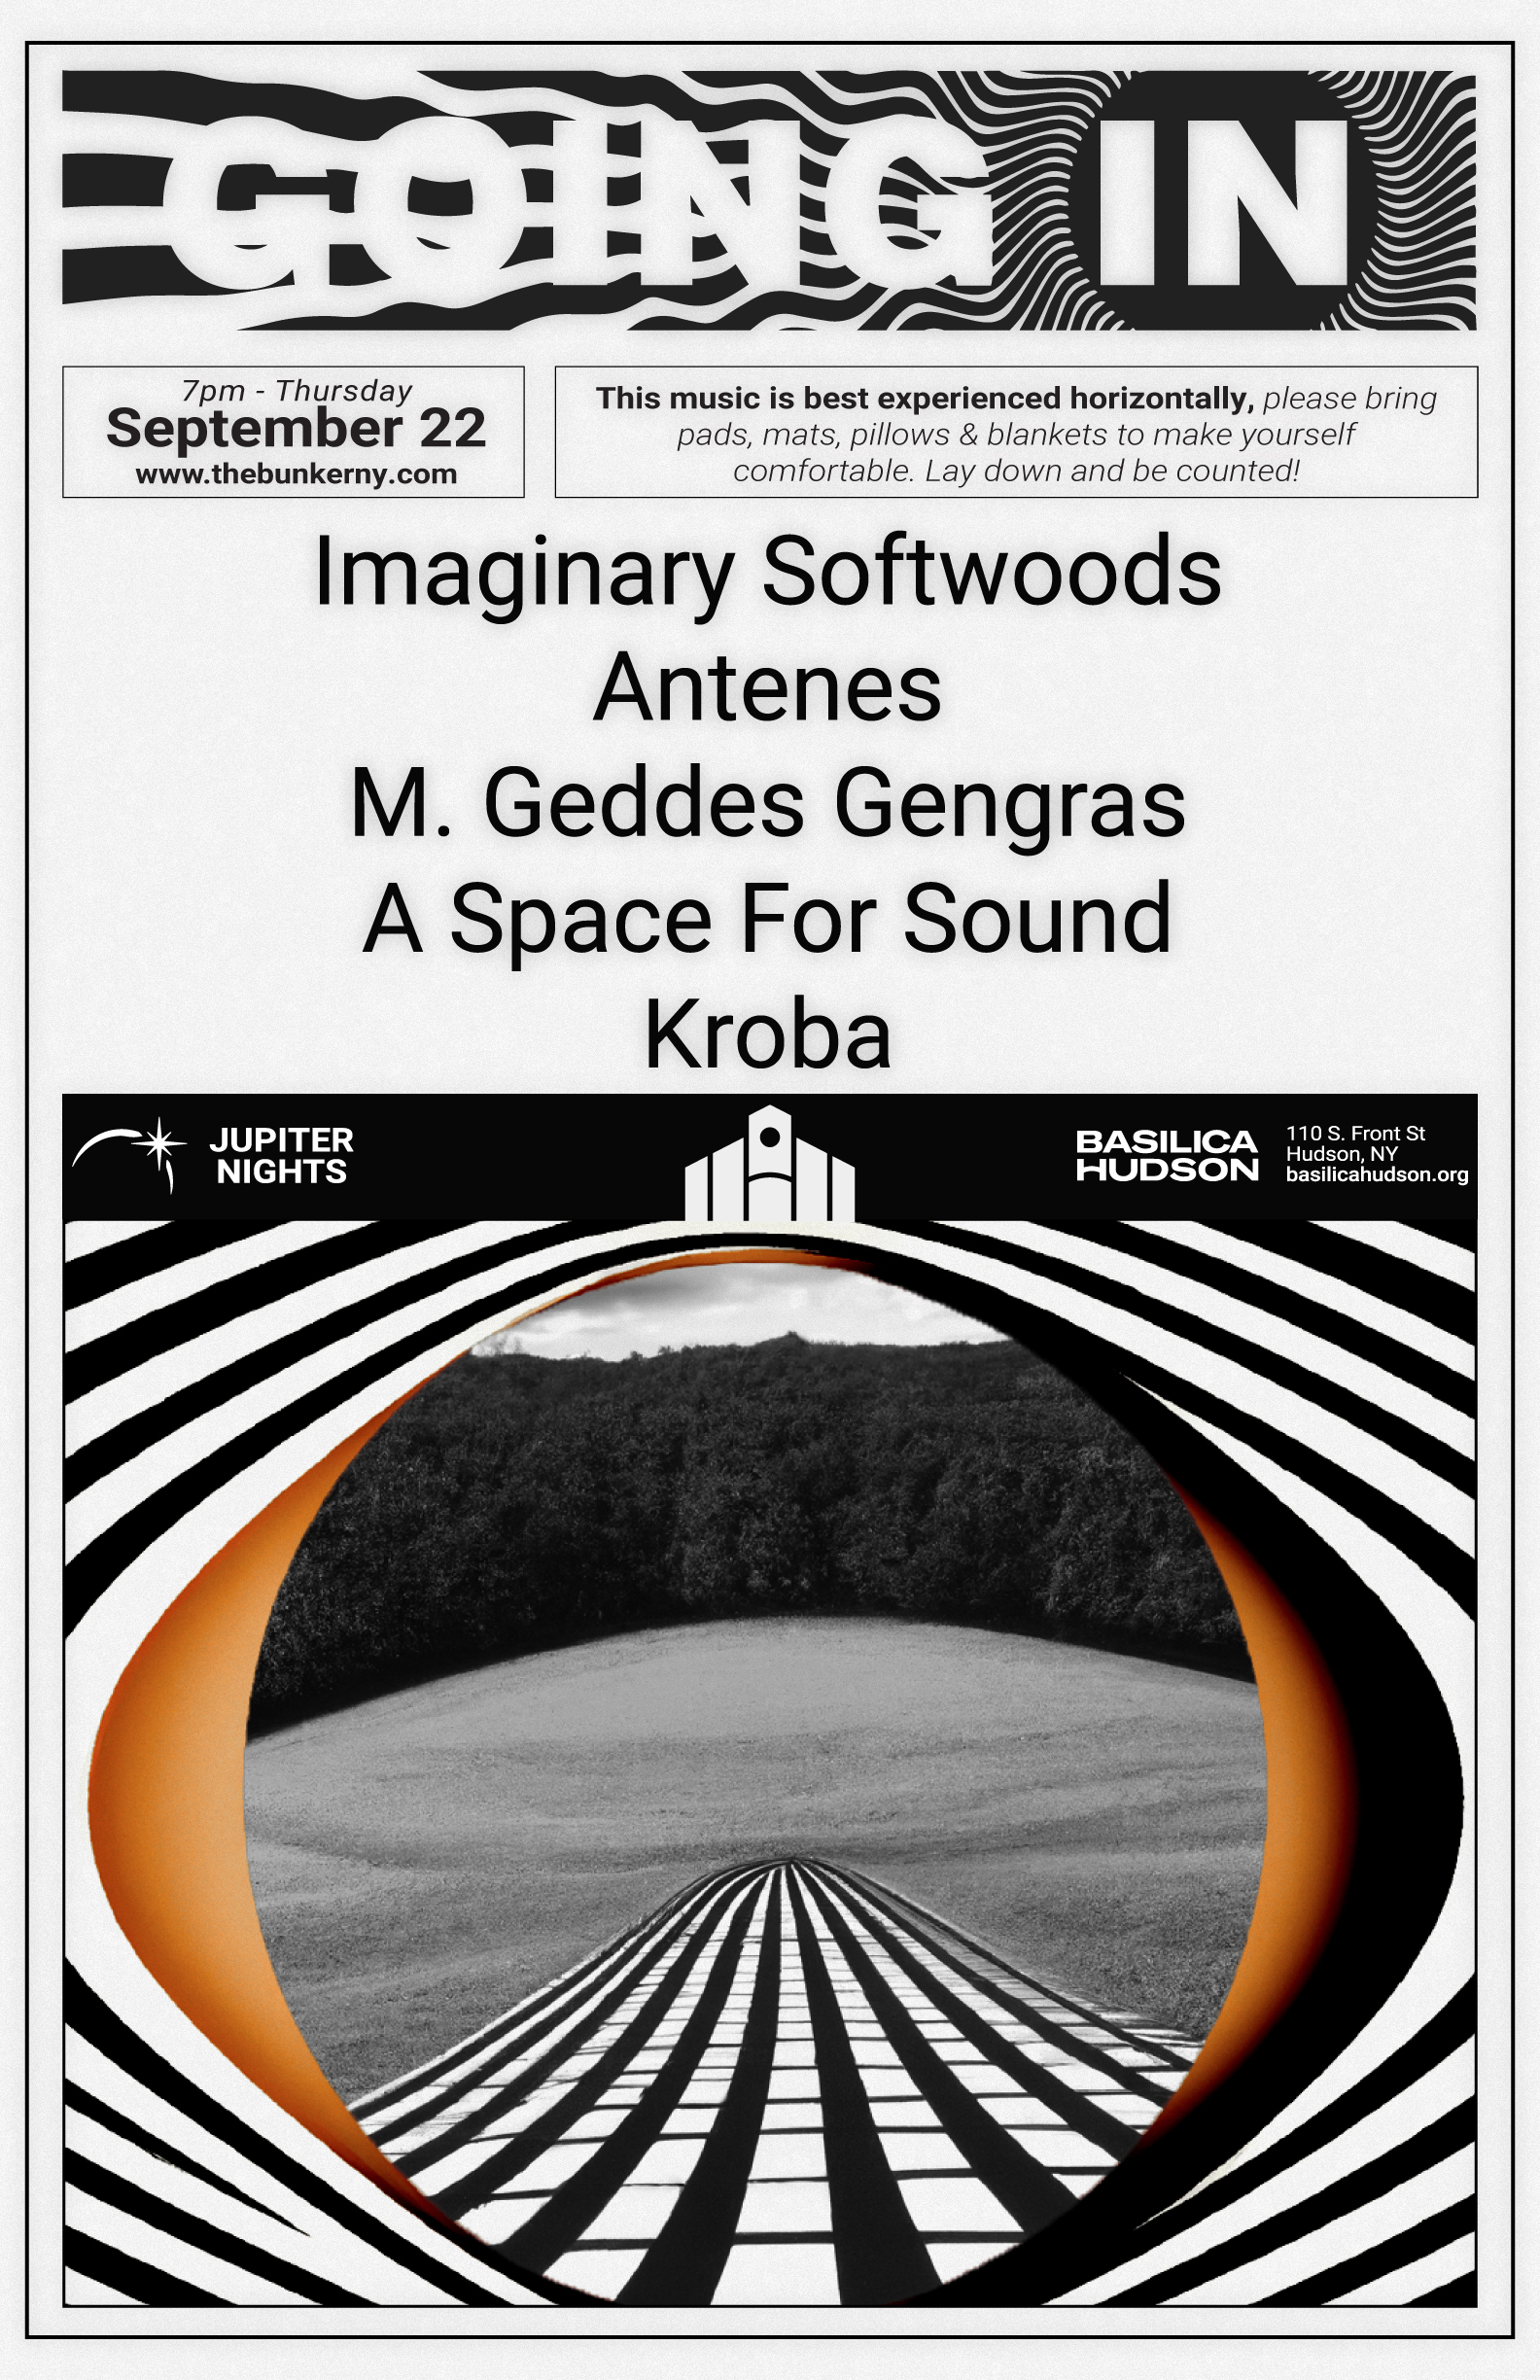 Going In with Imaginary Softwoods, Antenes, M. Geddes Gengras, A Space For Sound, Kroba - Flyer back